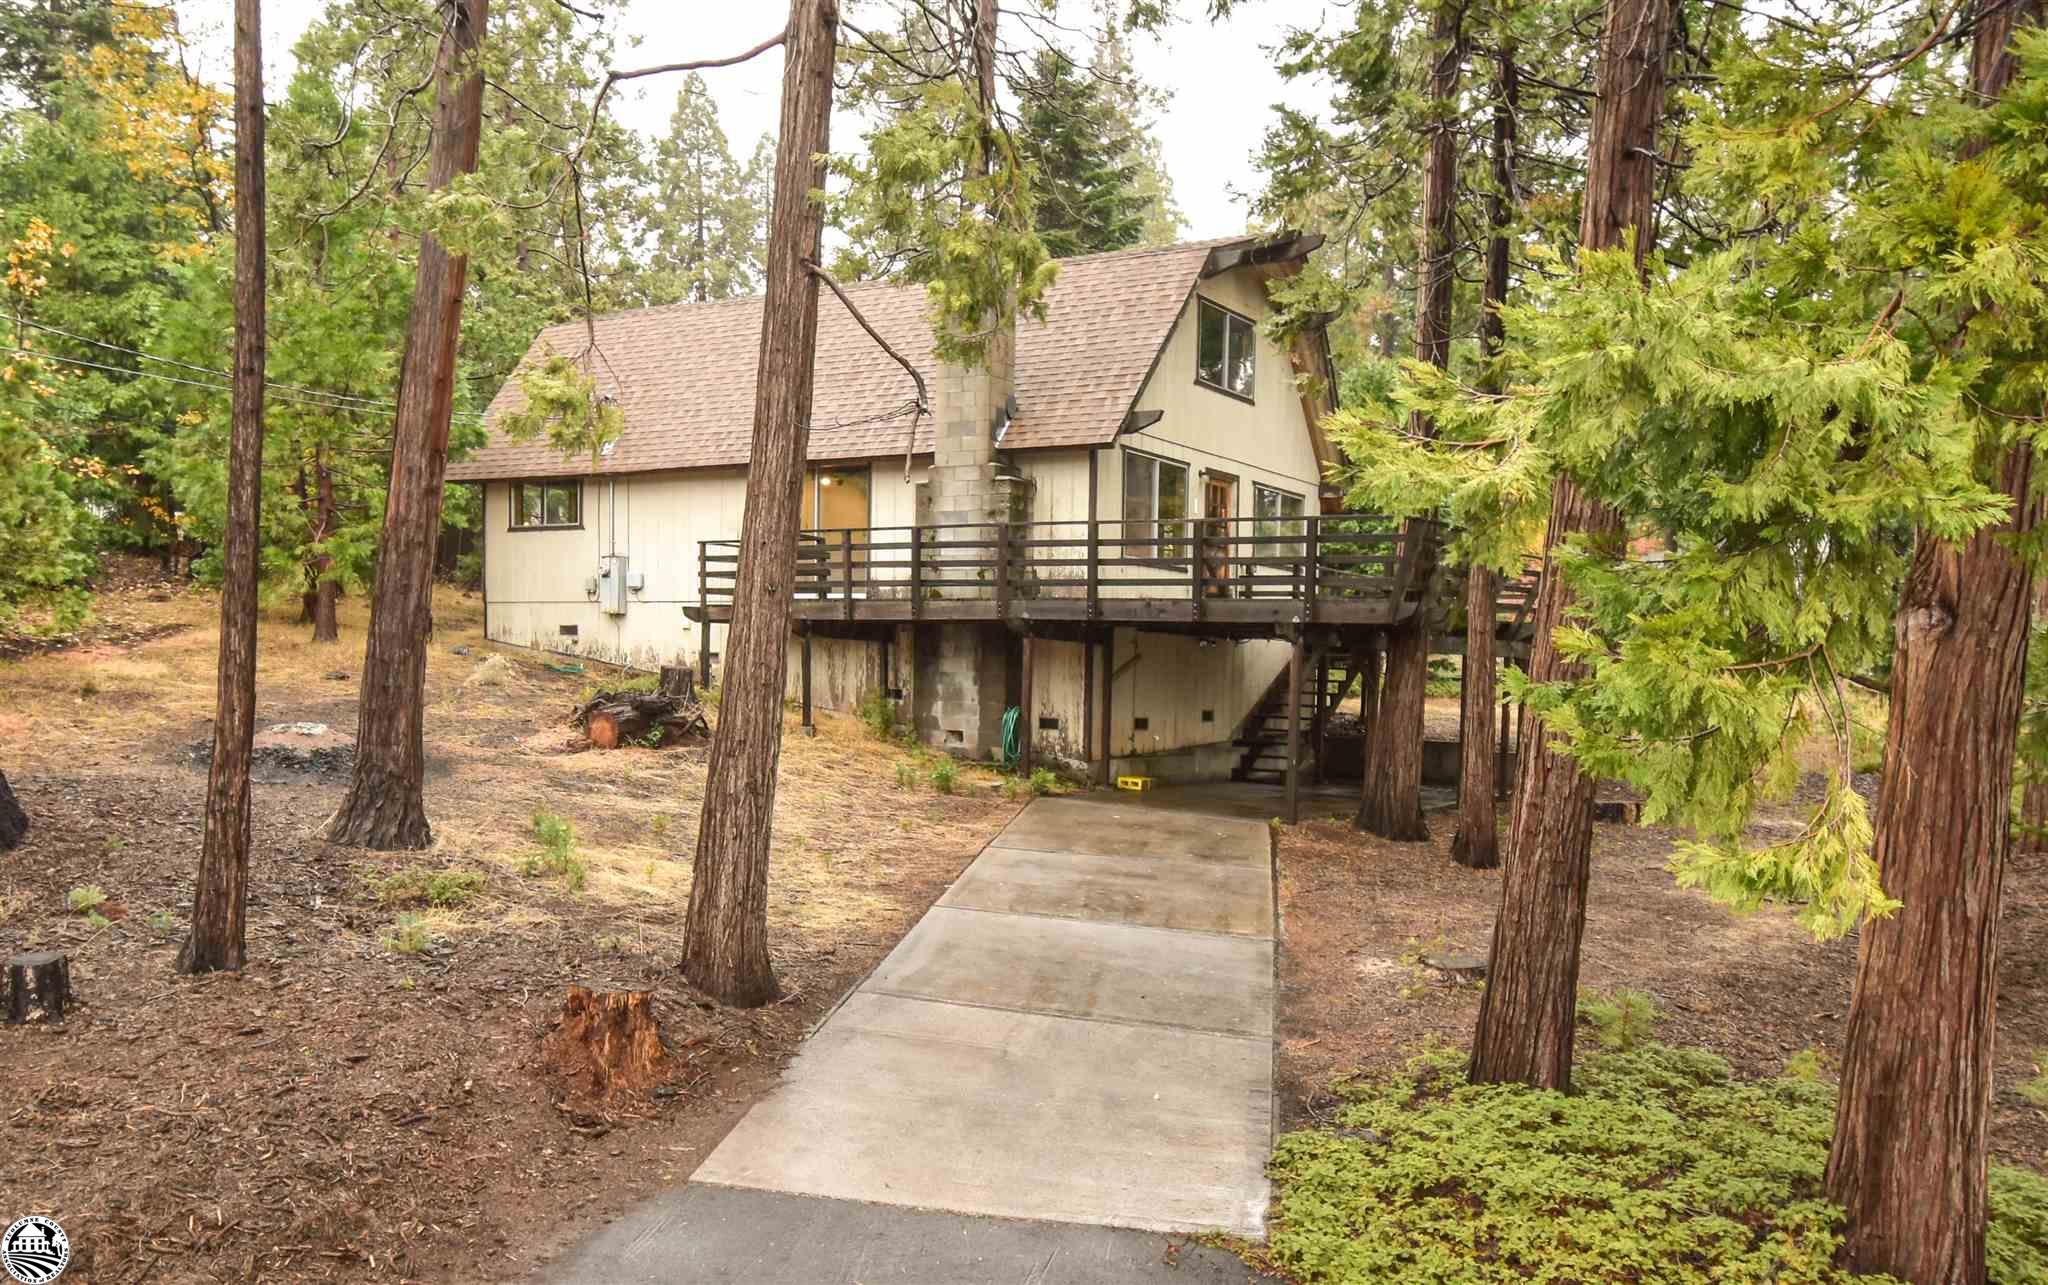 Photo of 21202 Placer Ave in Mi Wuk Village, CA